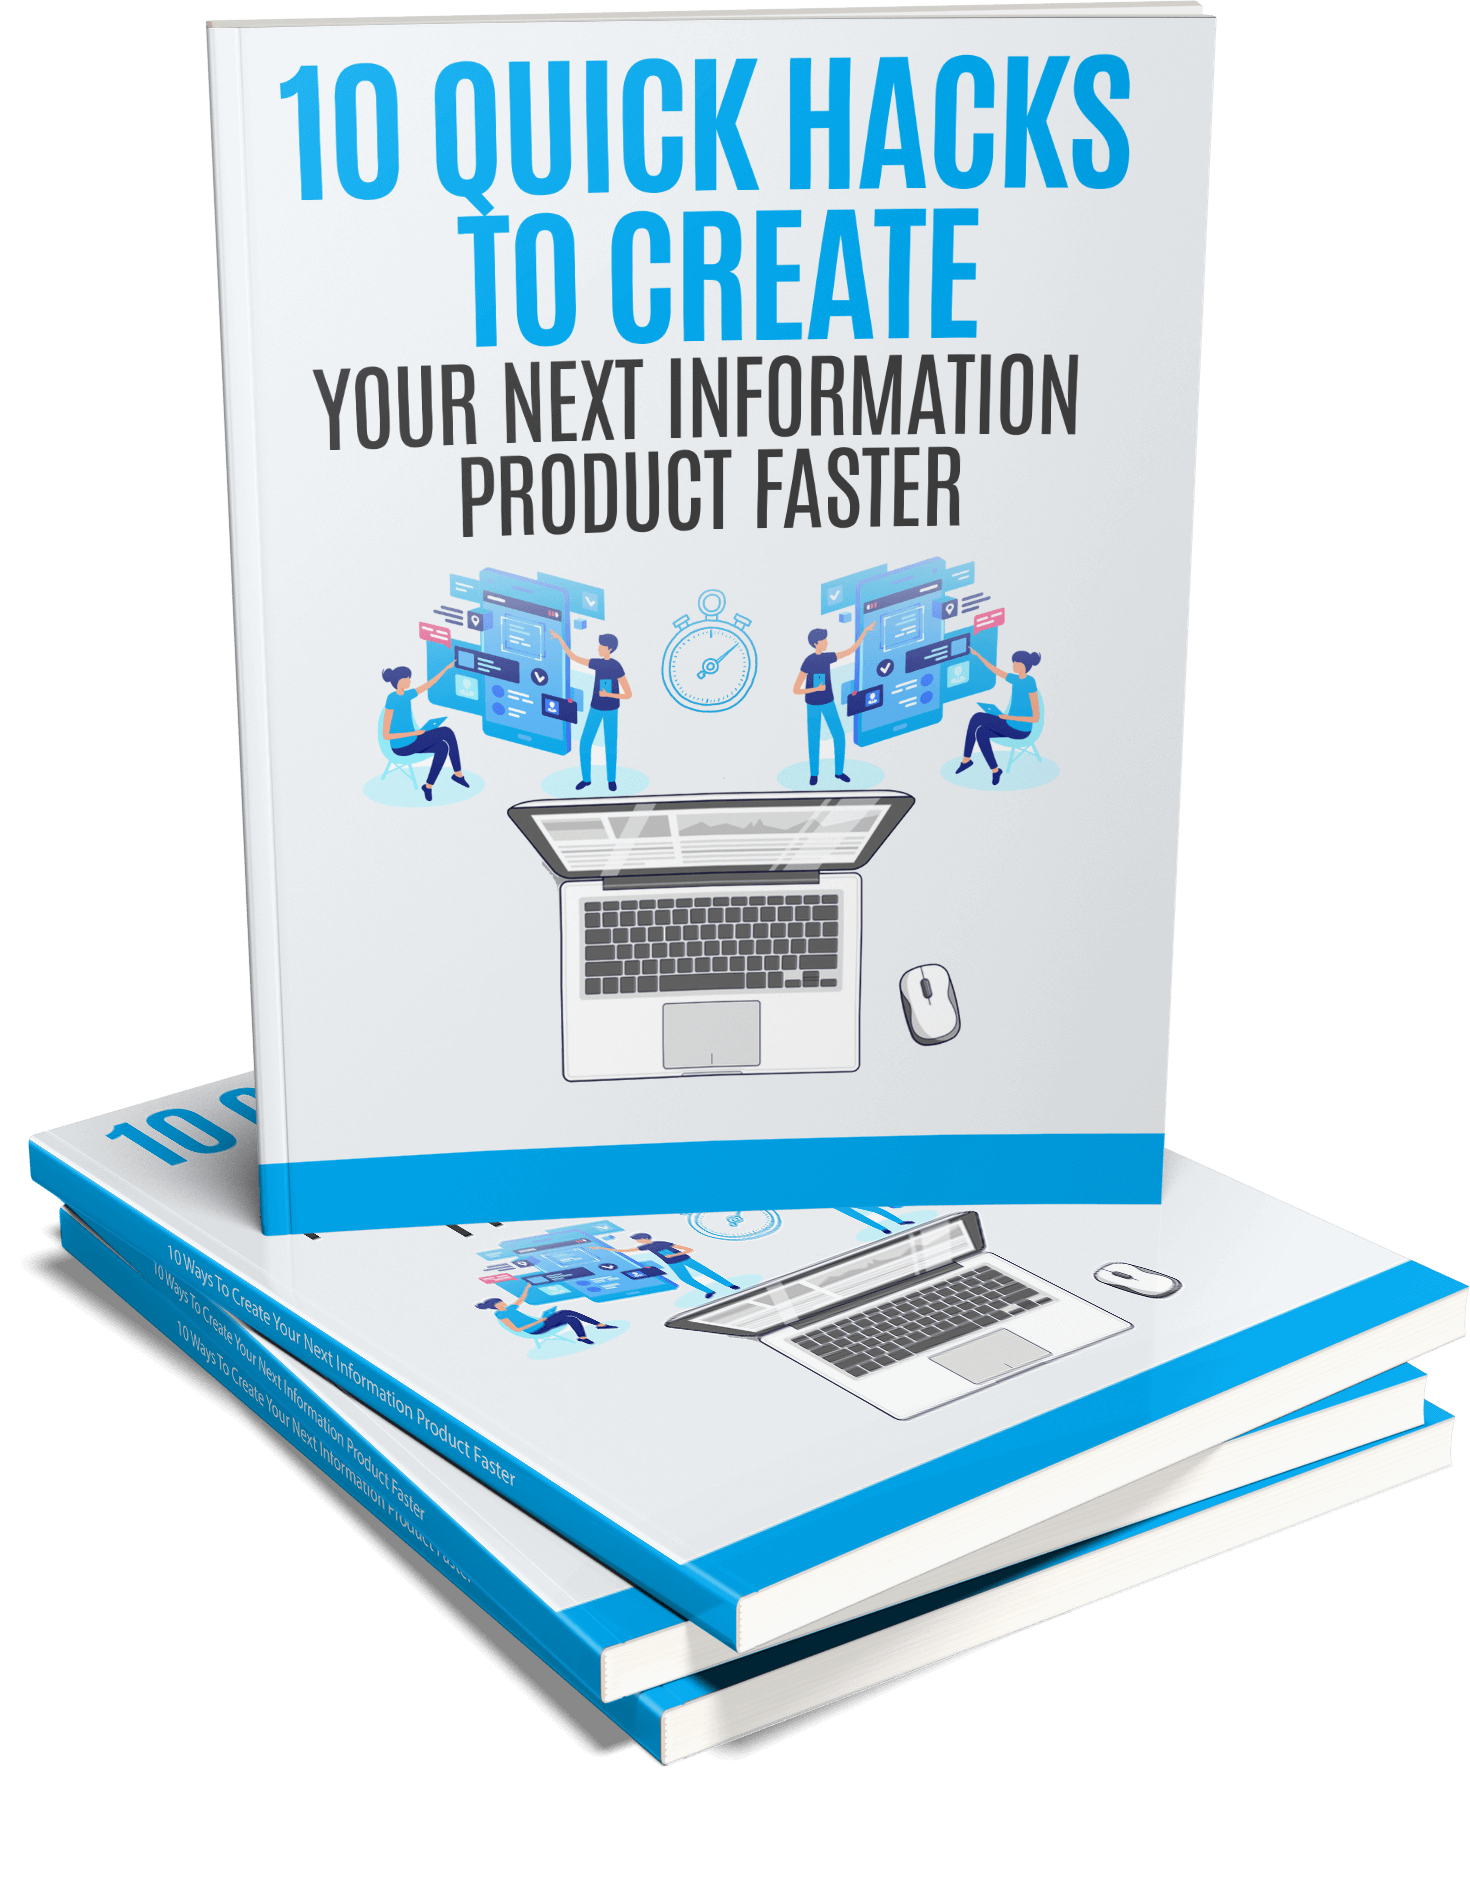 Hacks to Create Your Next Information Product Faster